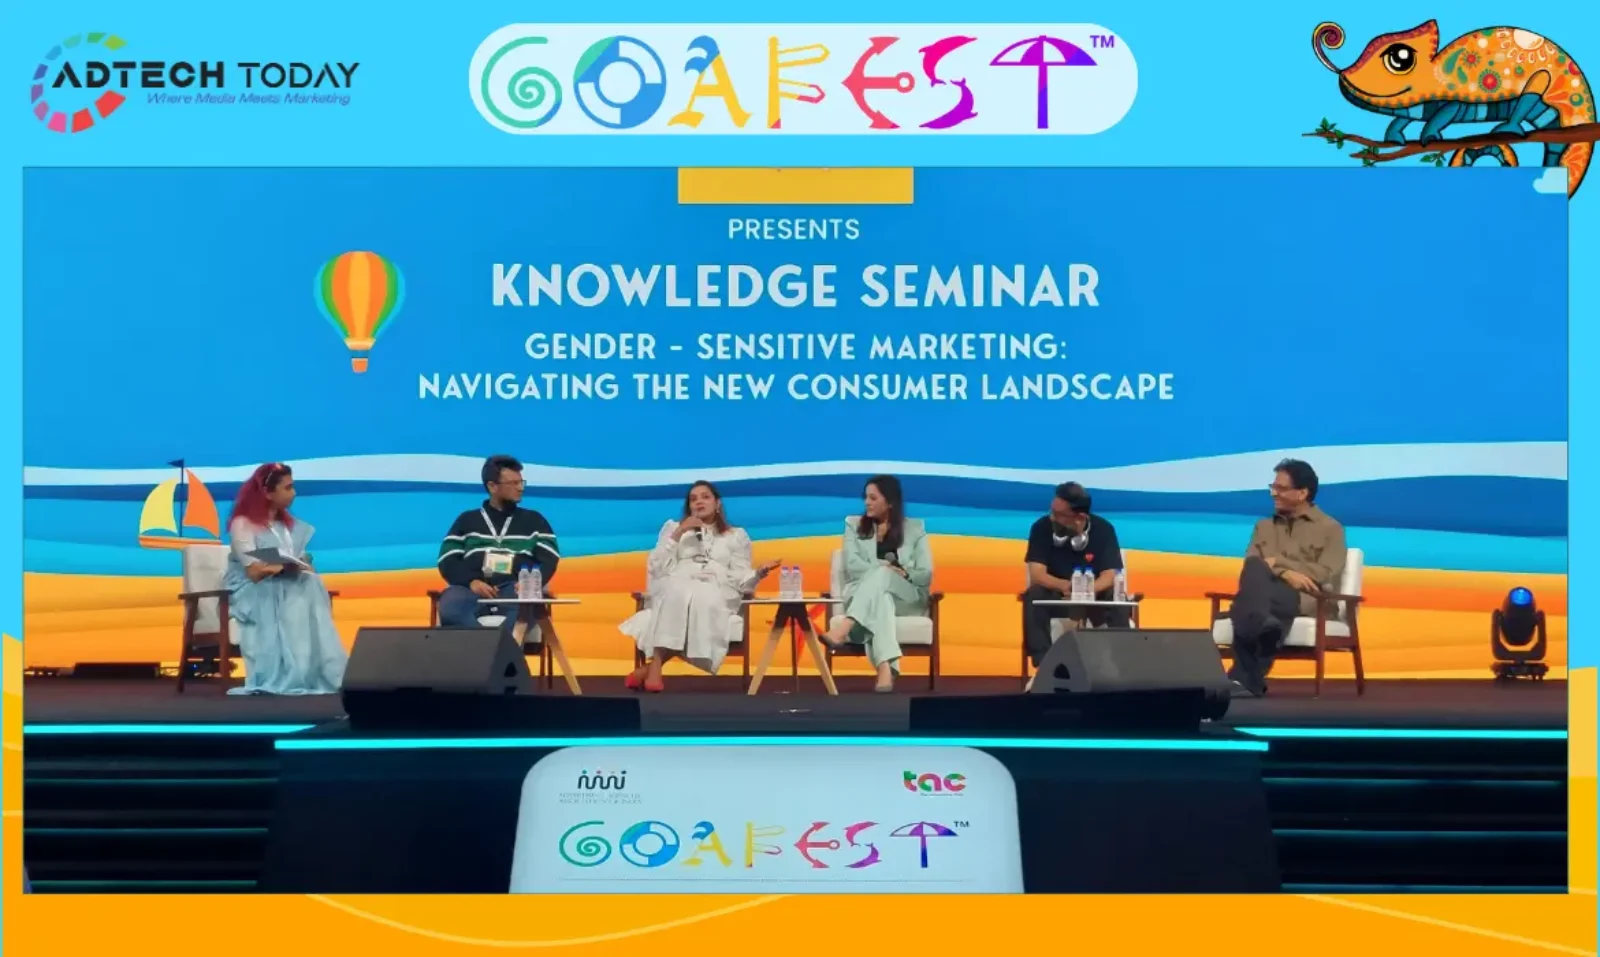 Goafest2024, Gender Marketing, Consumer Landscape, Advertising, Gender Equality, Inclusivity, Brand Engagement, Advertising, Marketing, Goafest, Goafest2024, Abby Awards, one show, panel discussion,